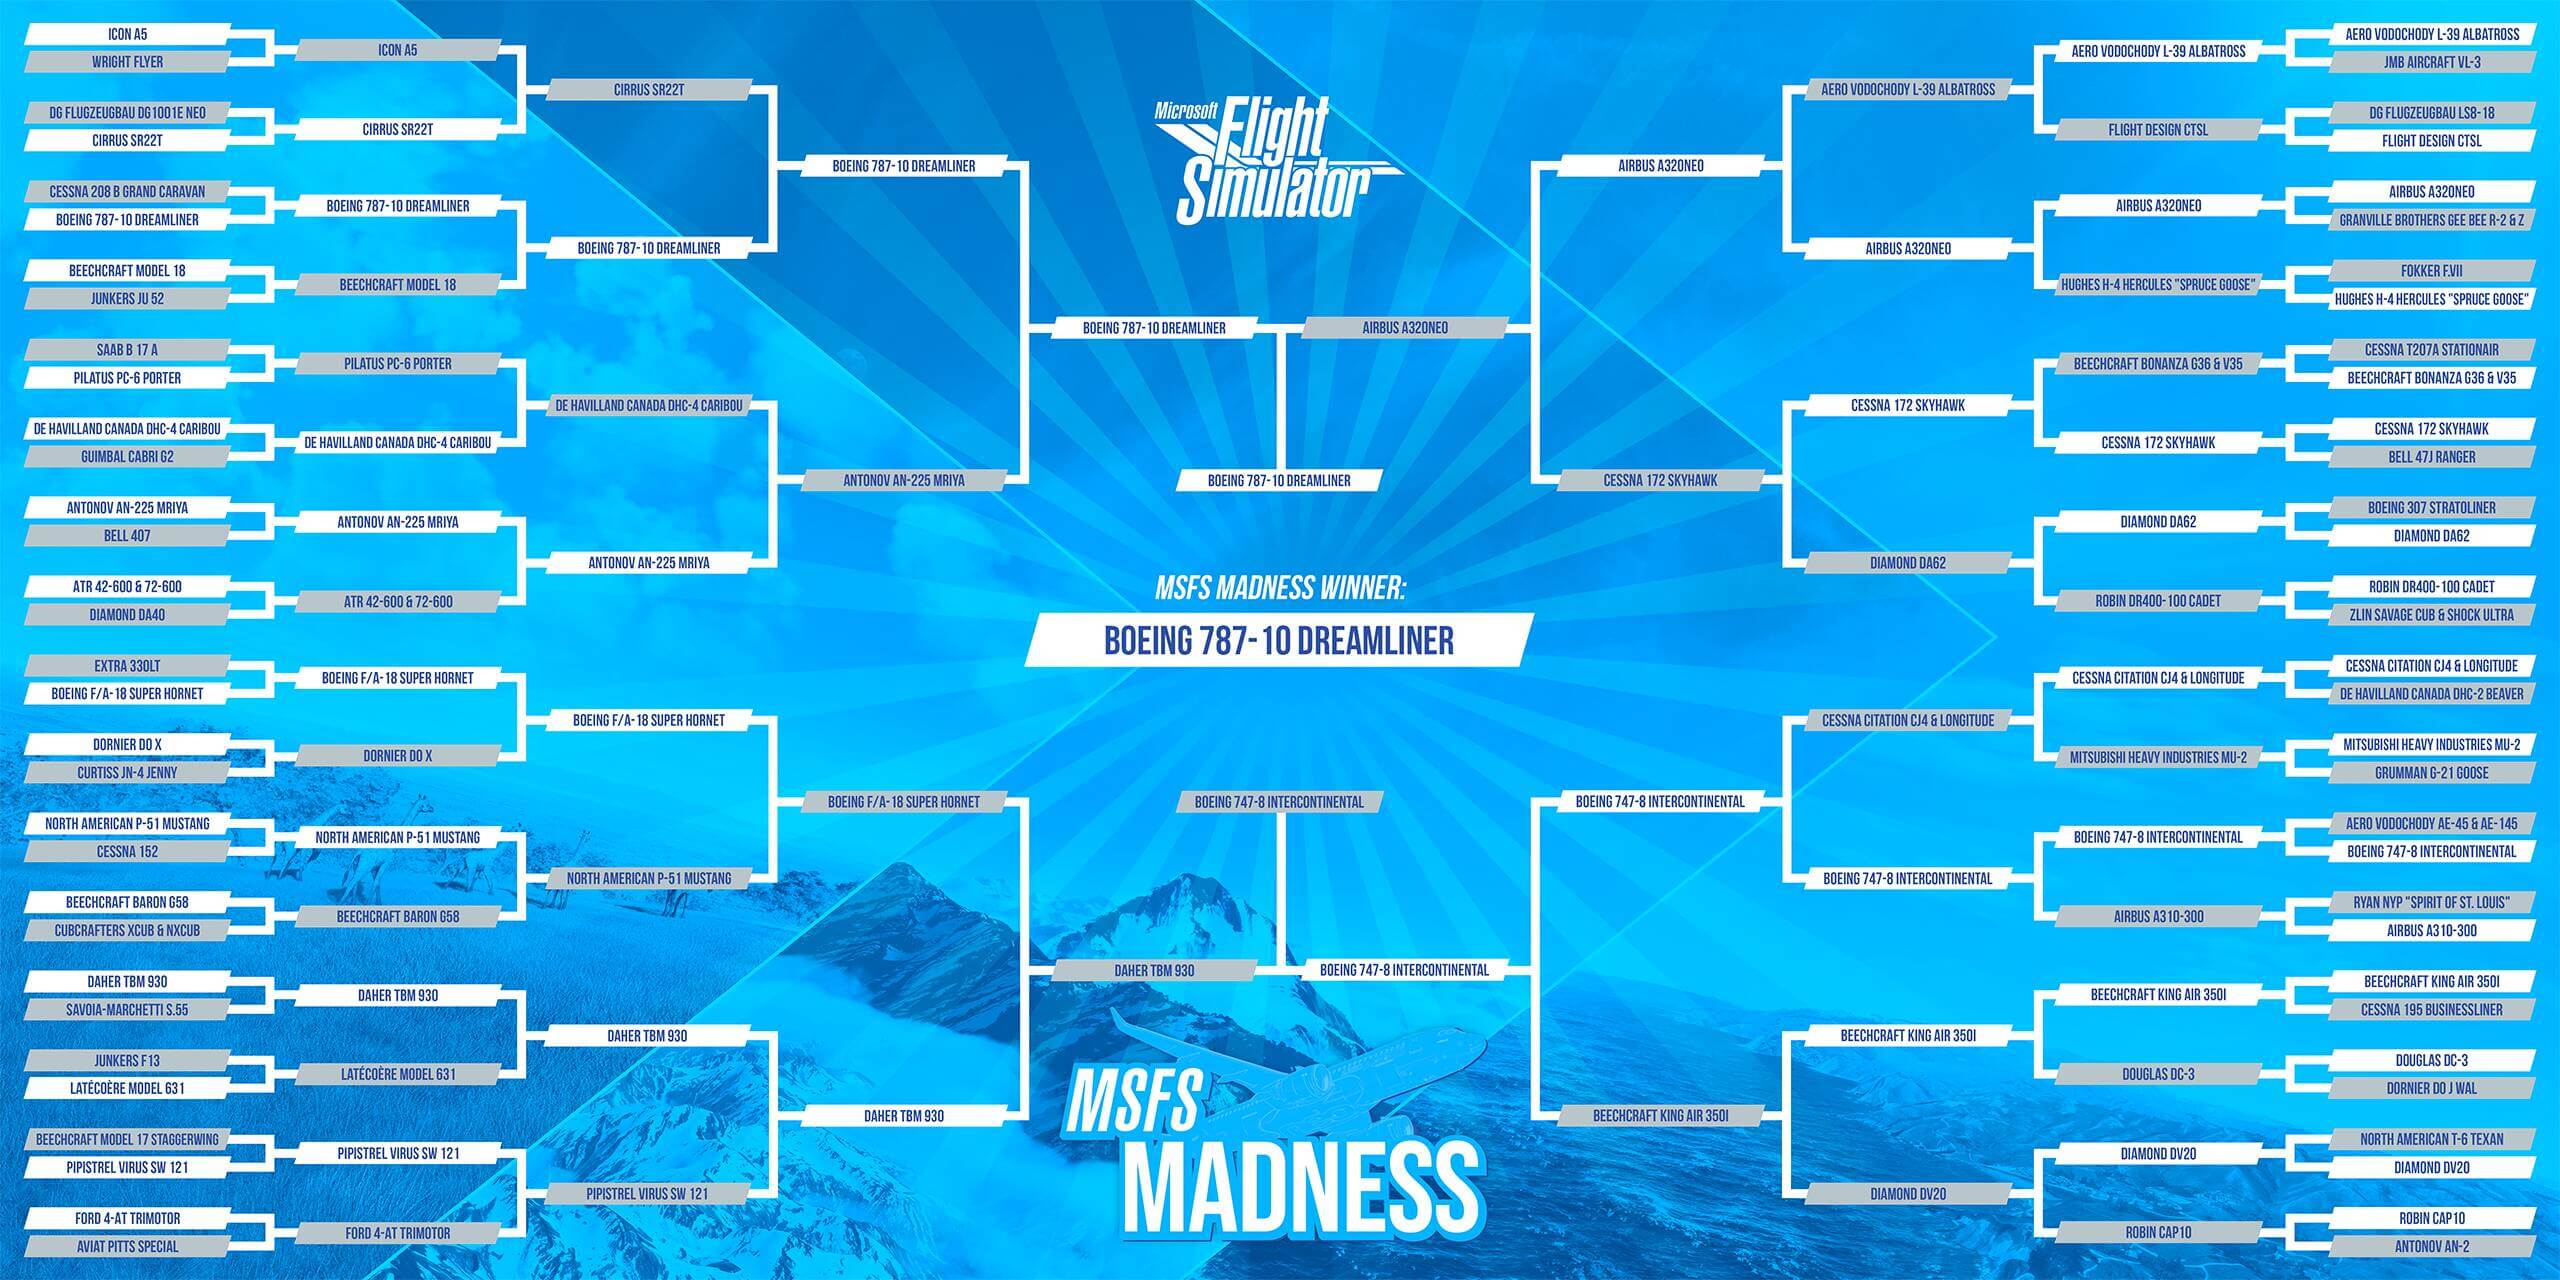 The final MSFS Madness tournament bracket showing the Boeing 787-10 Dreamliner as the community's selected winner